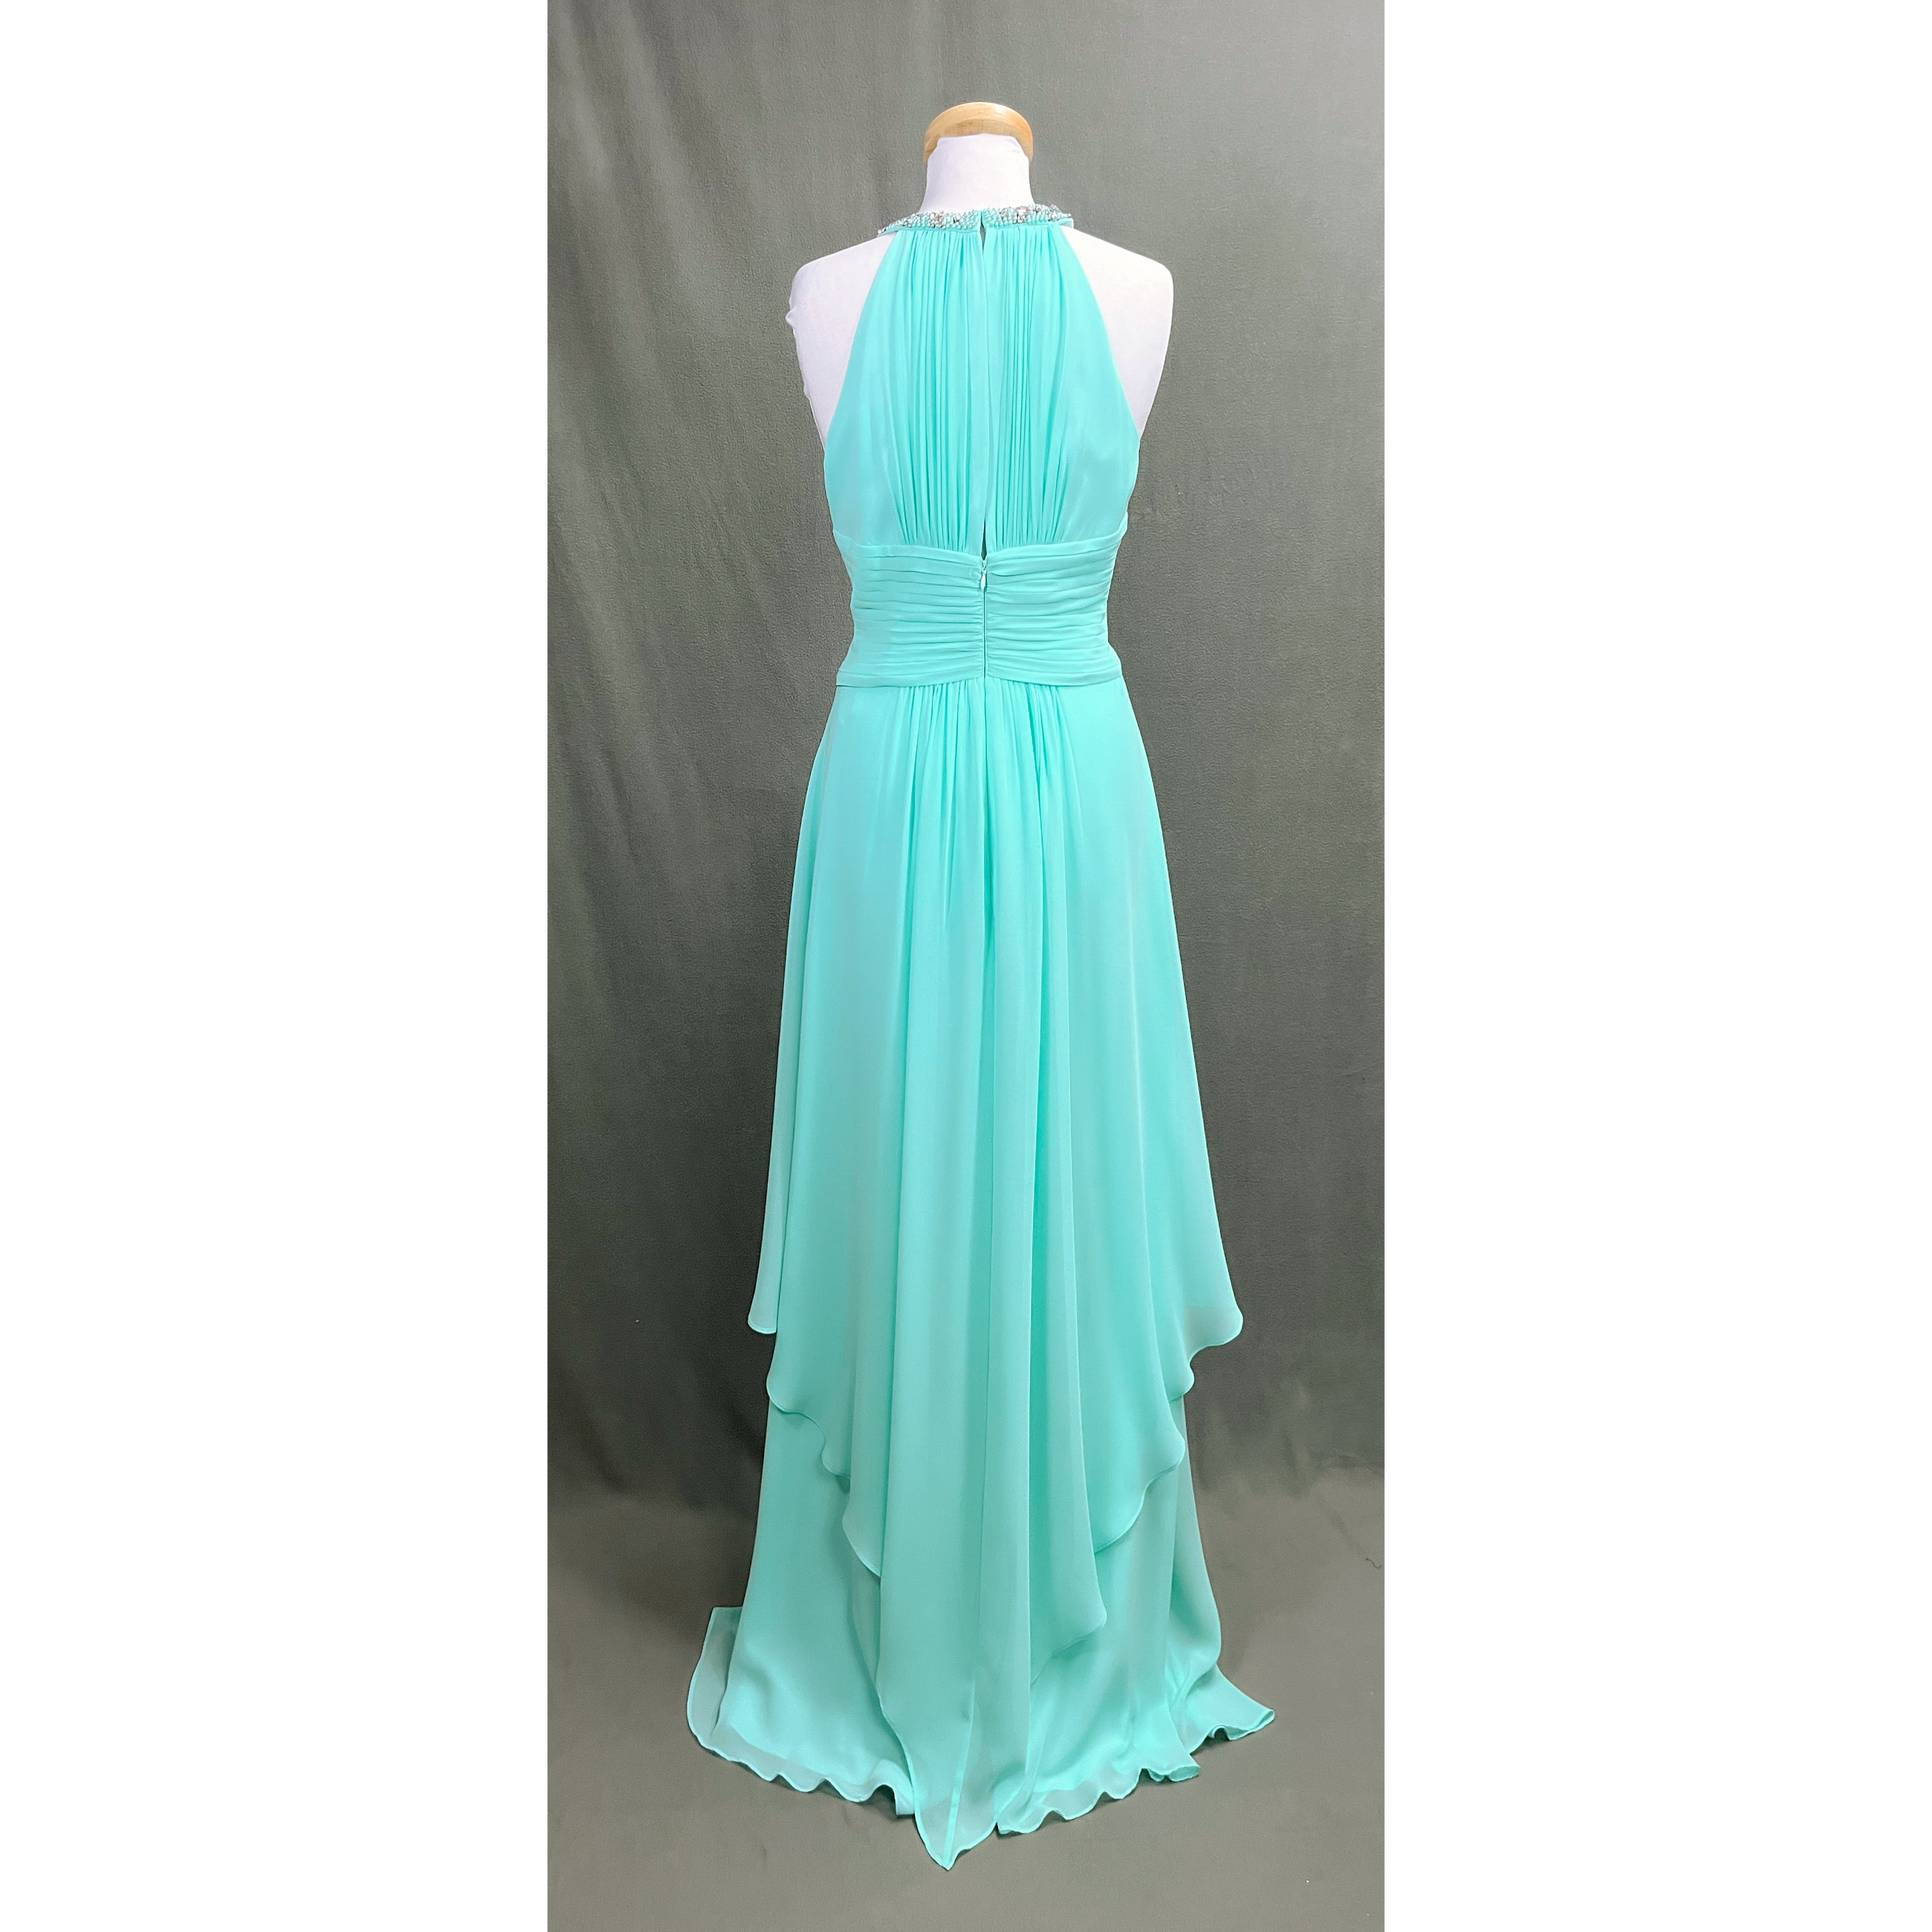 Donna Morgan spearmint dress, size 10, NEW WITH TAGS!